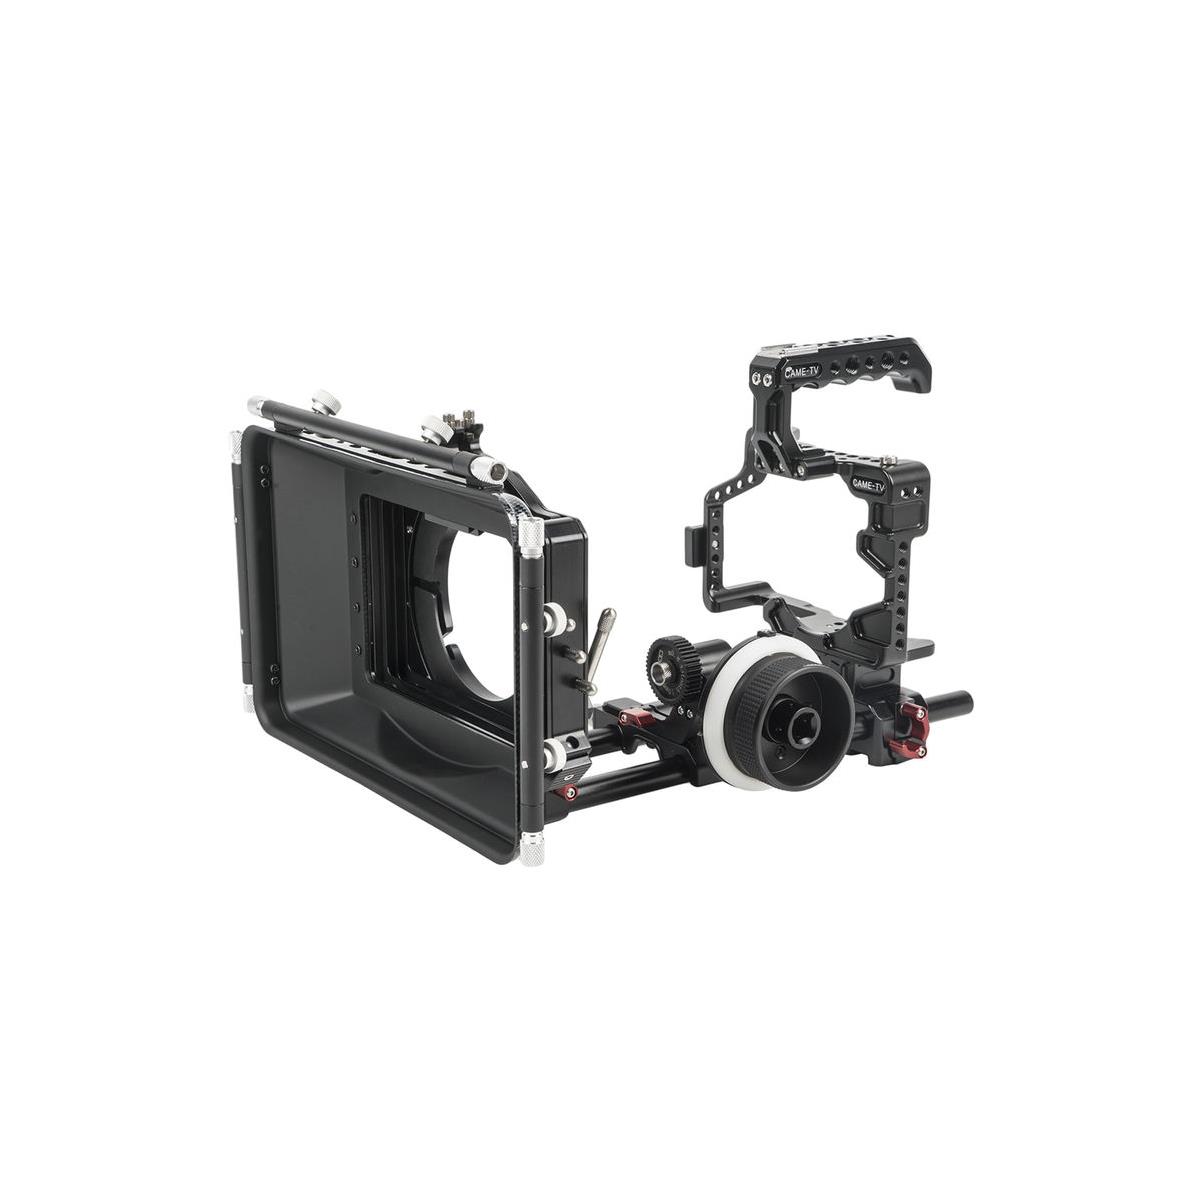 Image of Came-TV Protective Cage Plus for Panasonic GH5 Camera with Mattebox Follow Focus